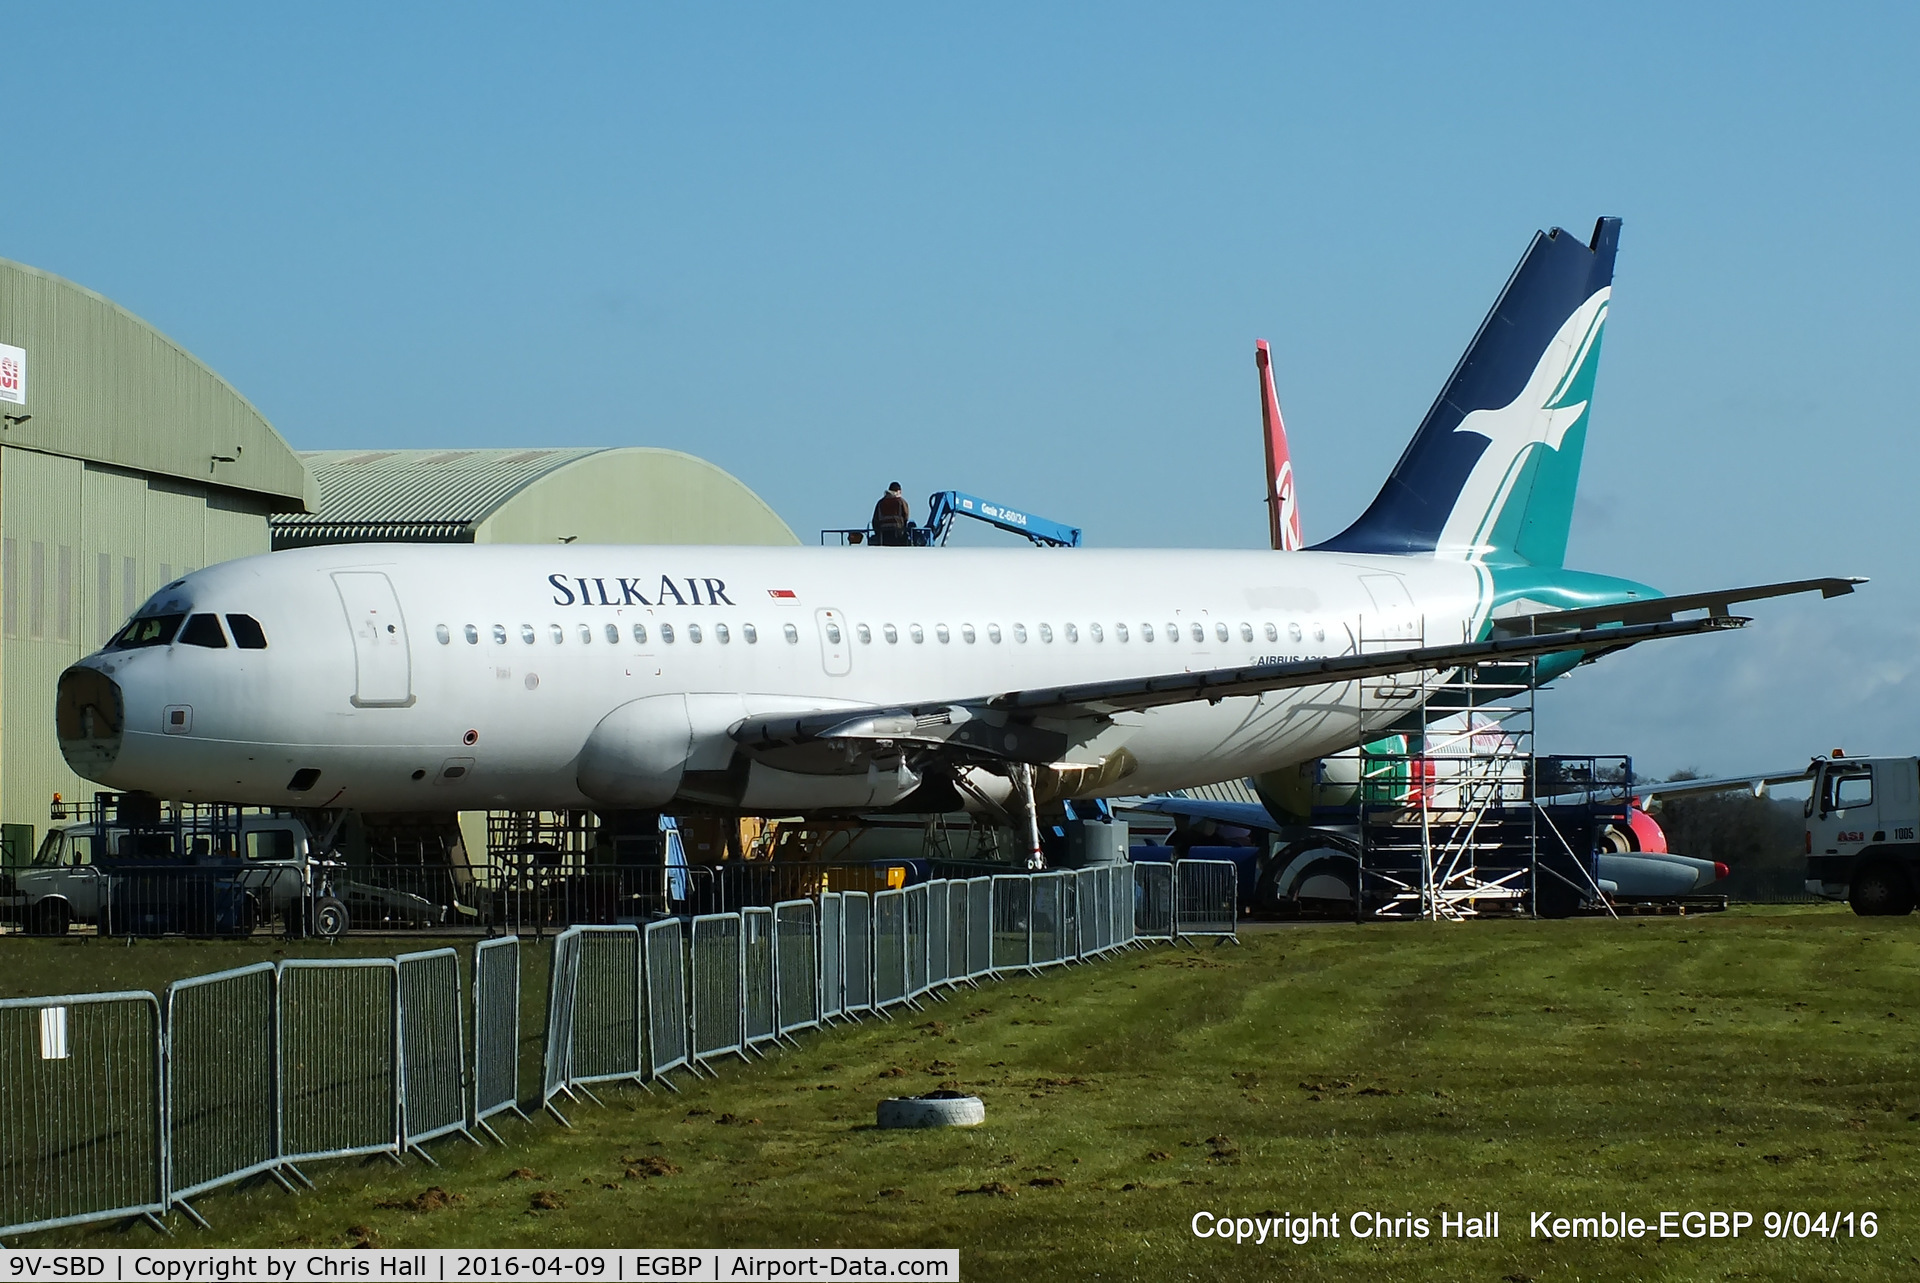 9V-SBD, 2002 Airbus A319-132 C/N 1698, being parted out by ASI at Kemble